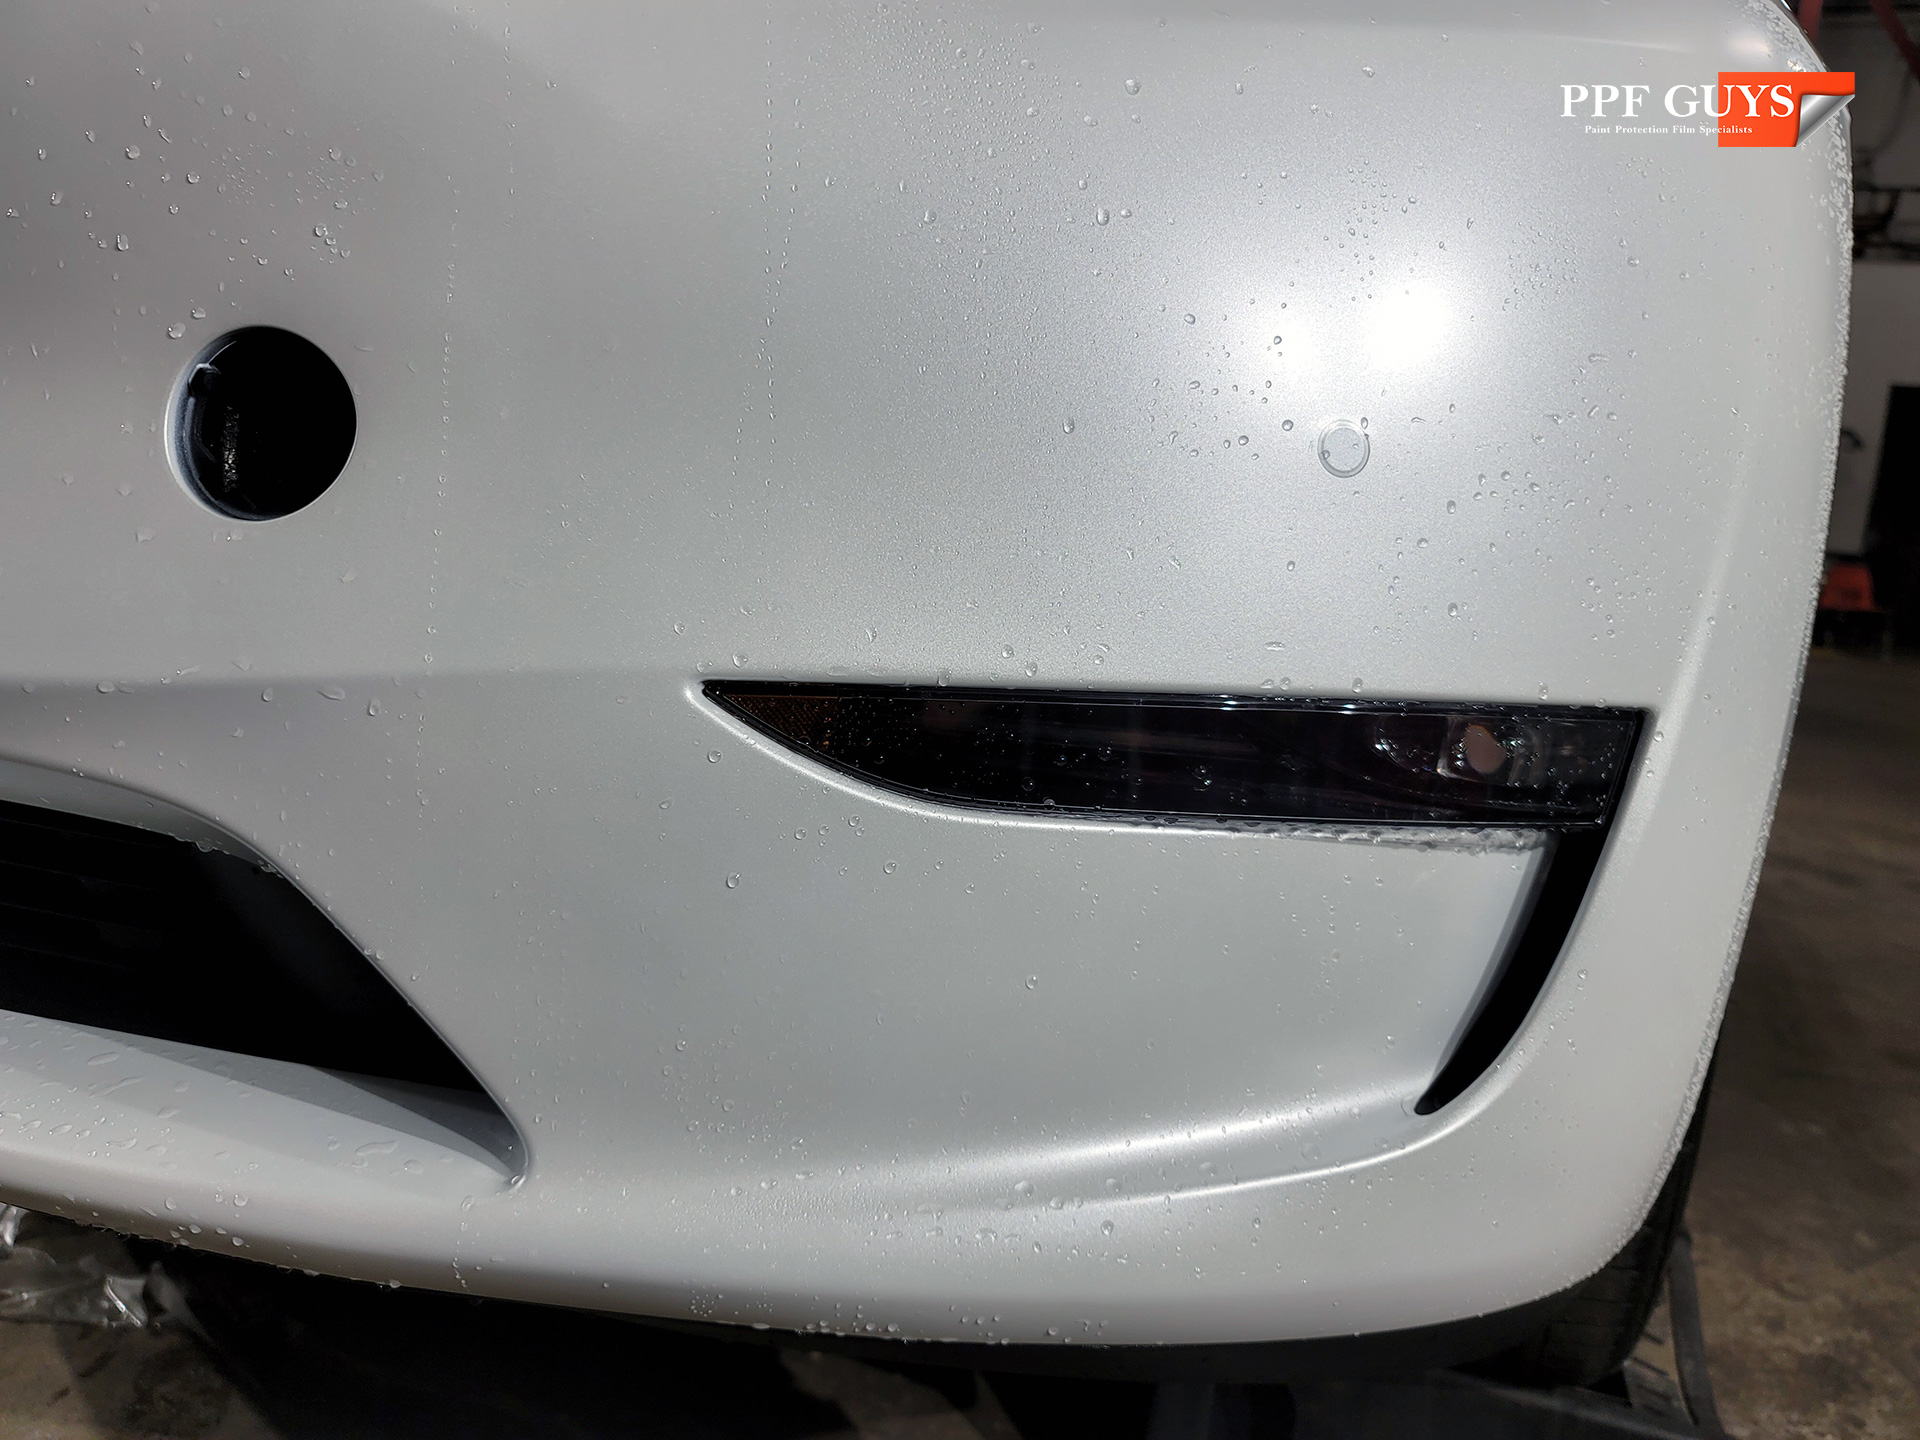 PPF Guys Model Y White Xpel Stealth, ceramic, painted emblems (5).jpg